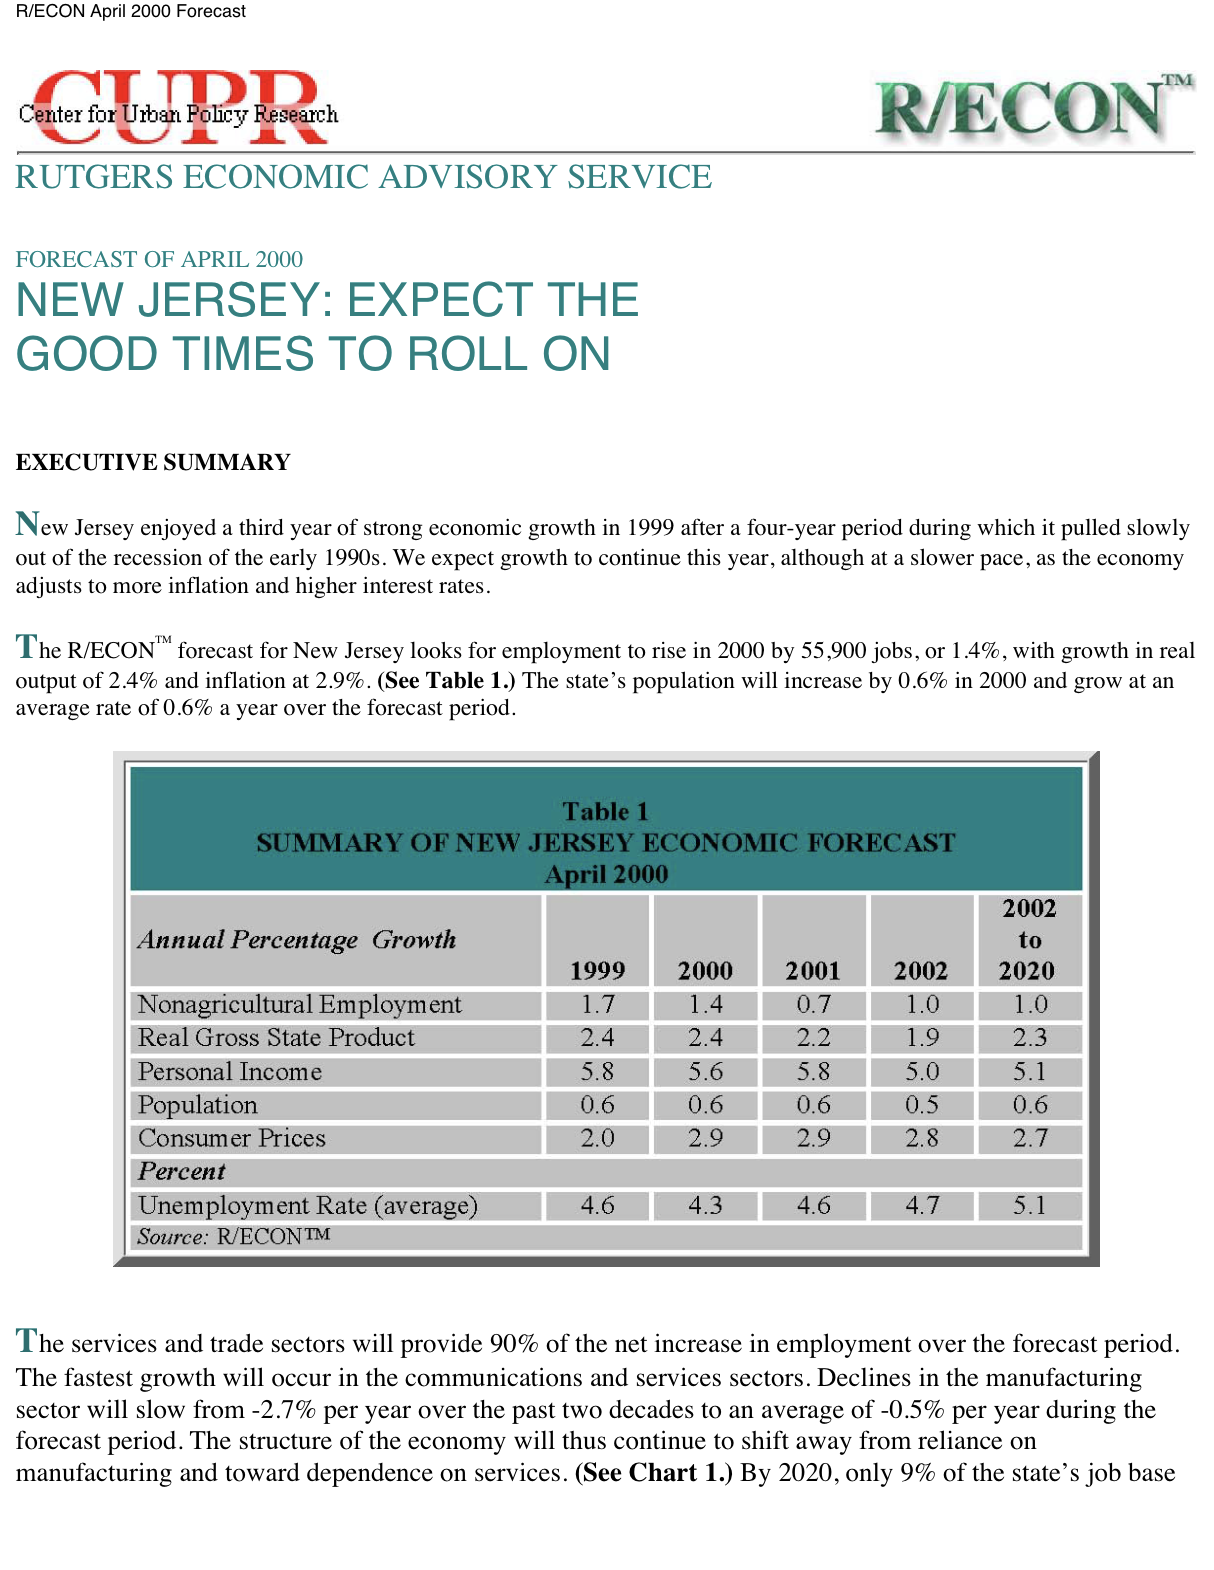 Forecast of April 2000 New Jersey: Expect the Good times to Roll On